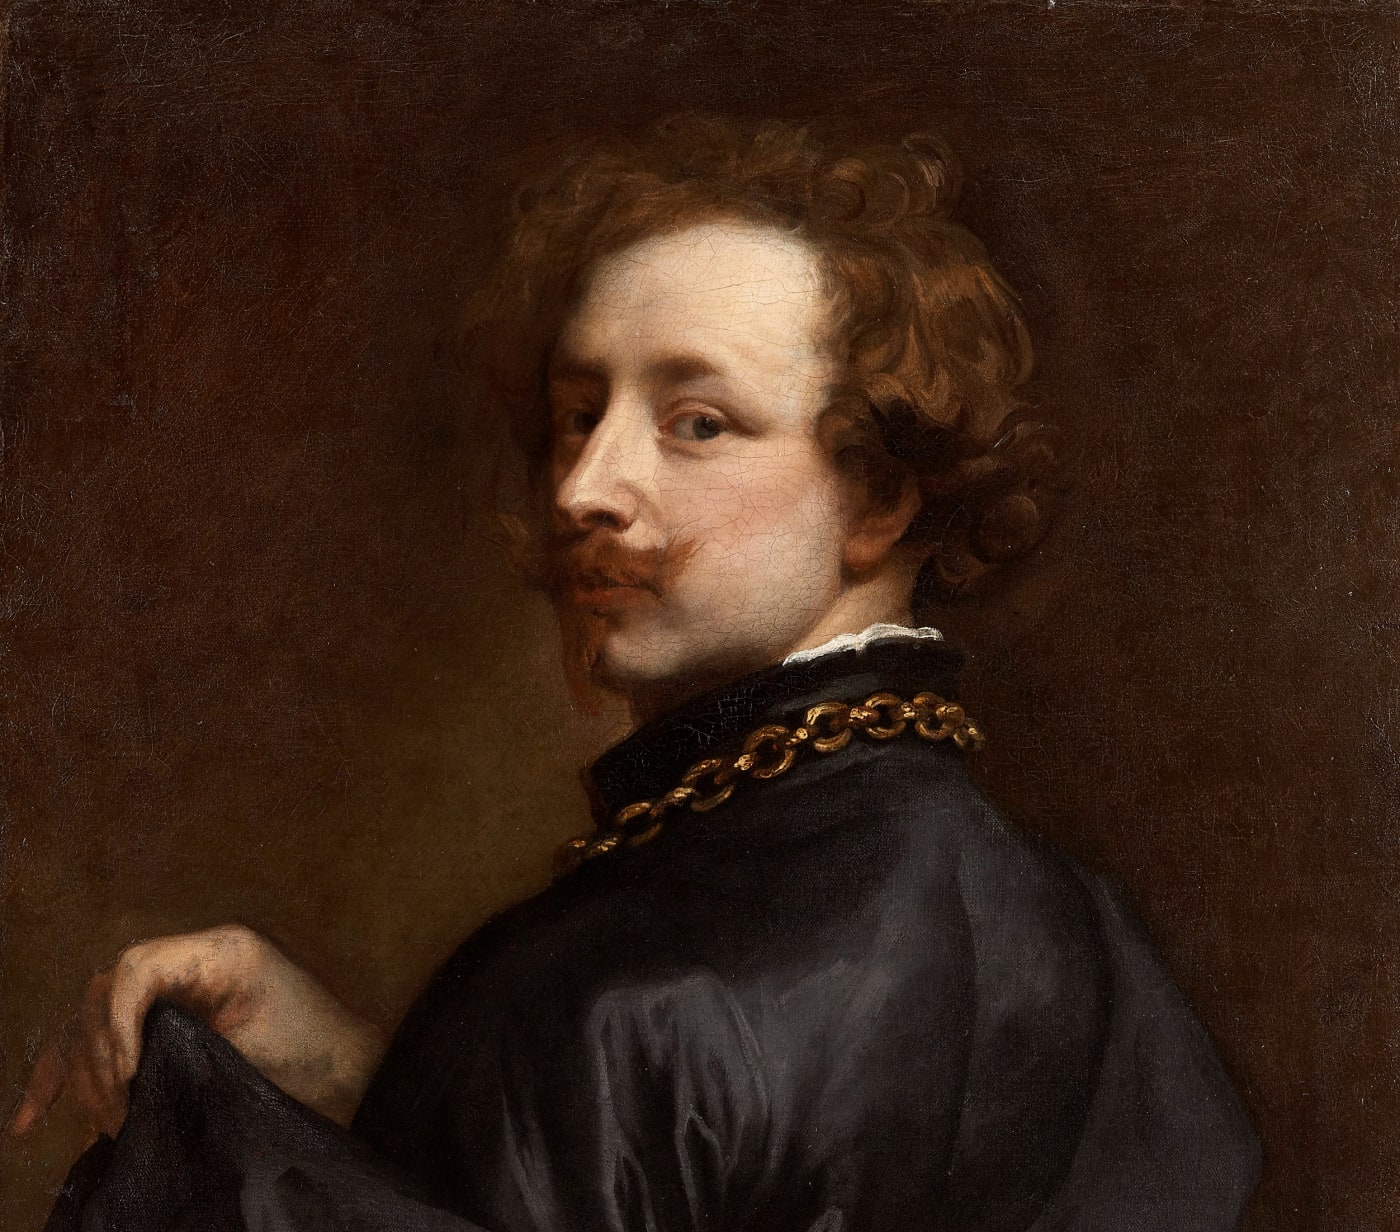 self portrait of sir anthony van dyck painted in 1640 during the seventeenth century this work was previously with philip mould & company